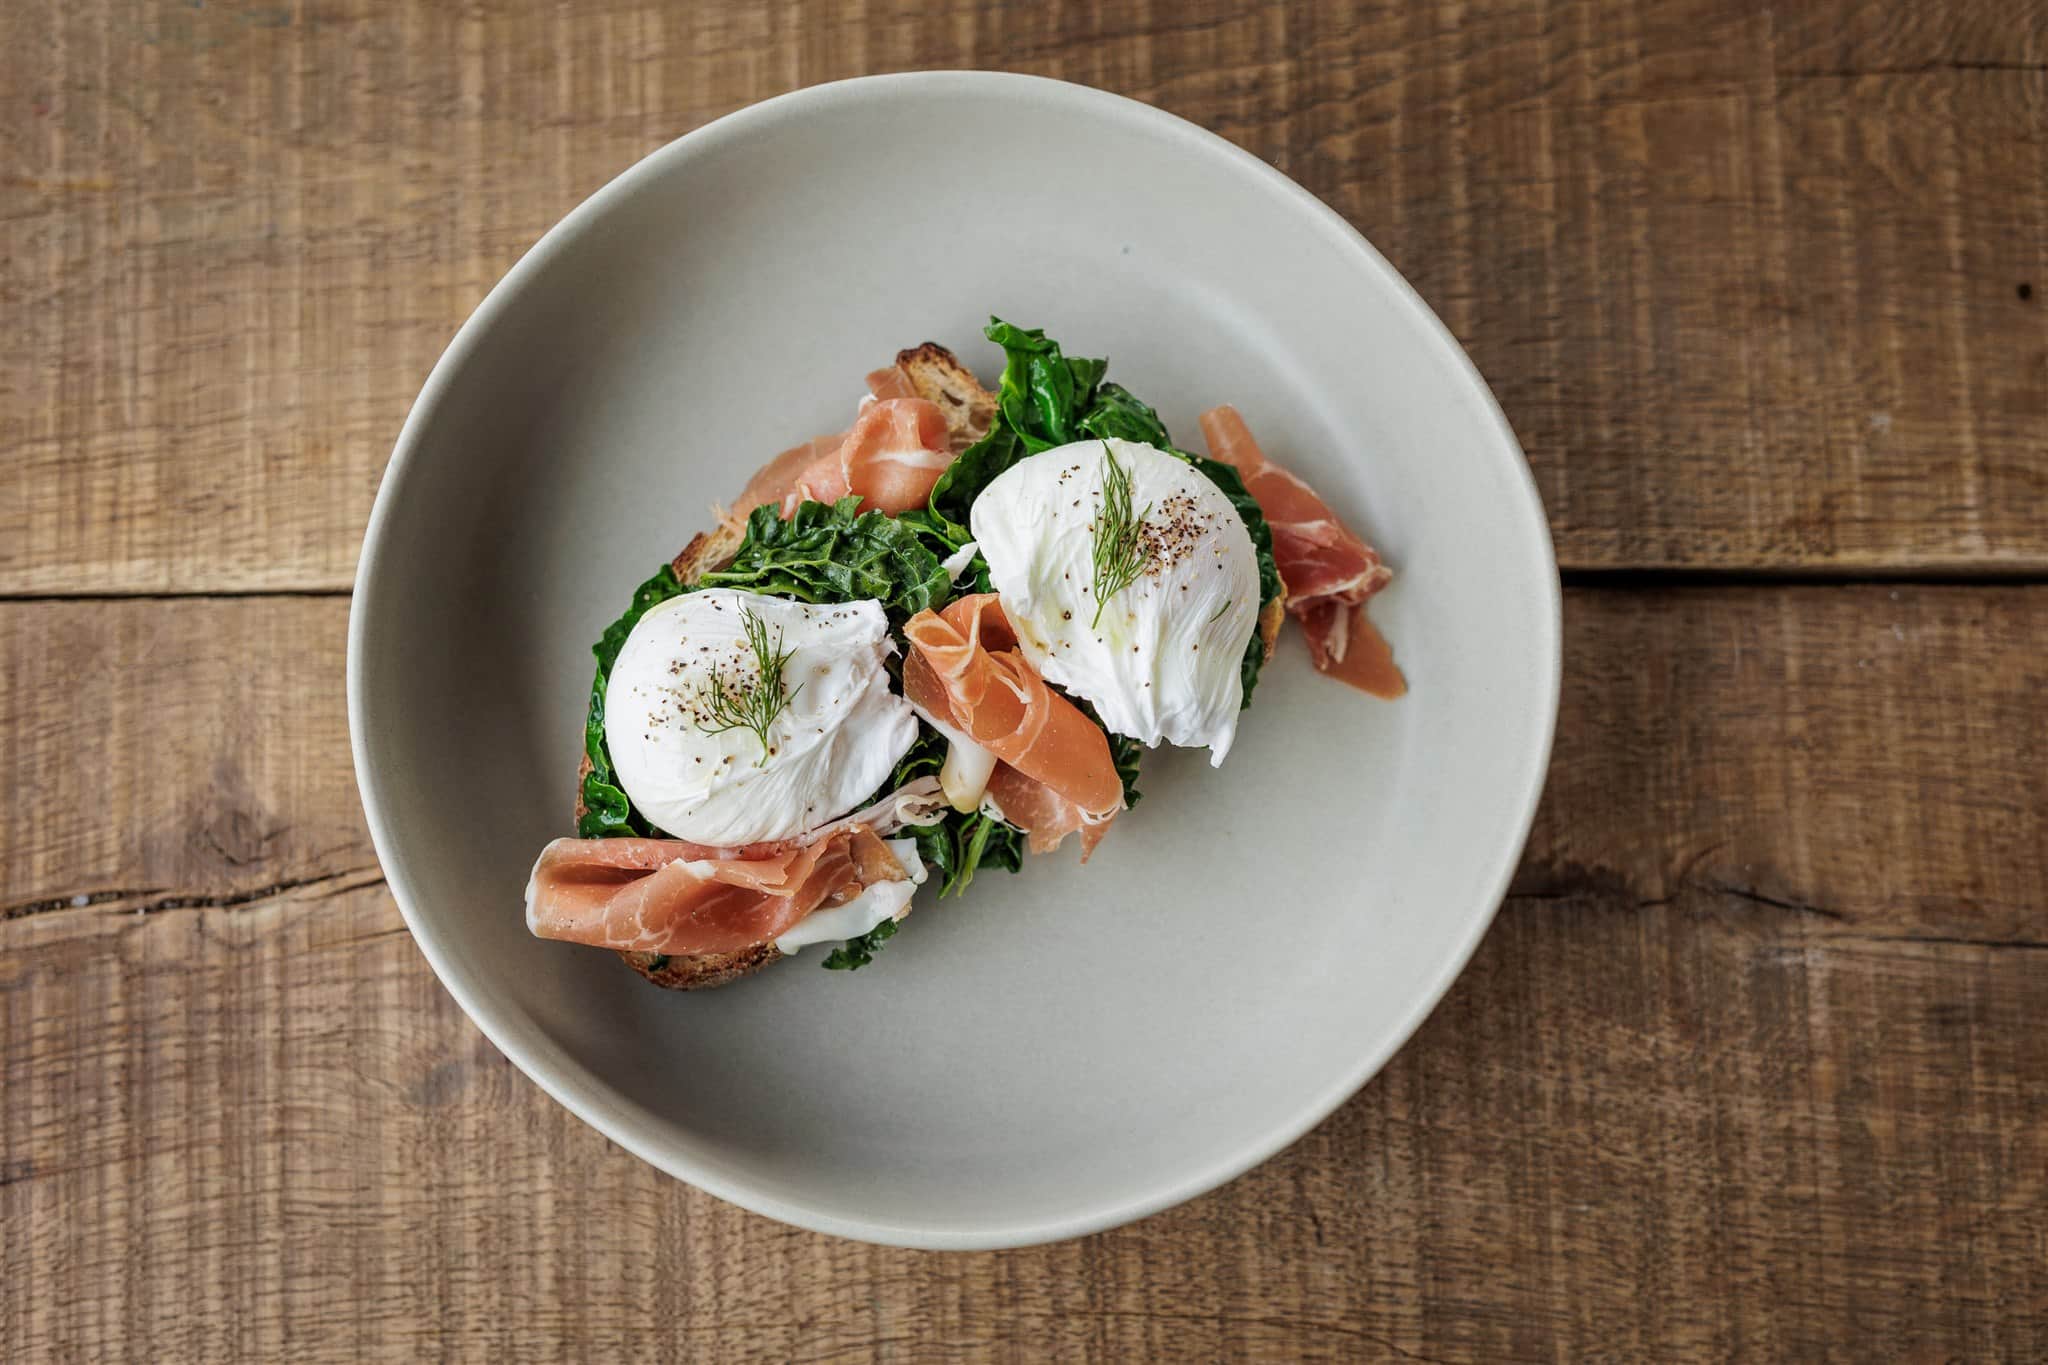 Proscuitto, poached eggs and pesto